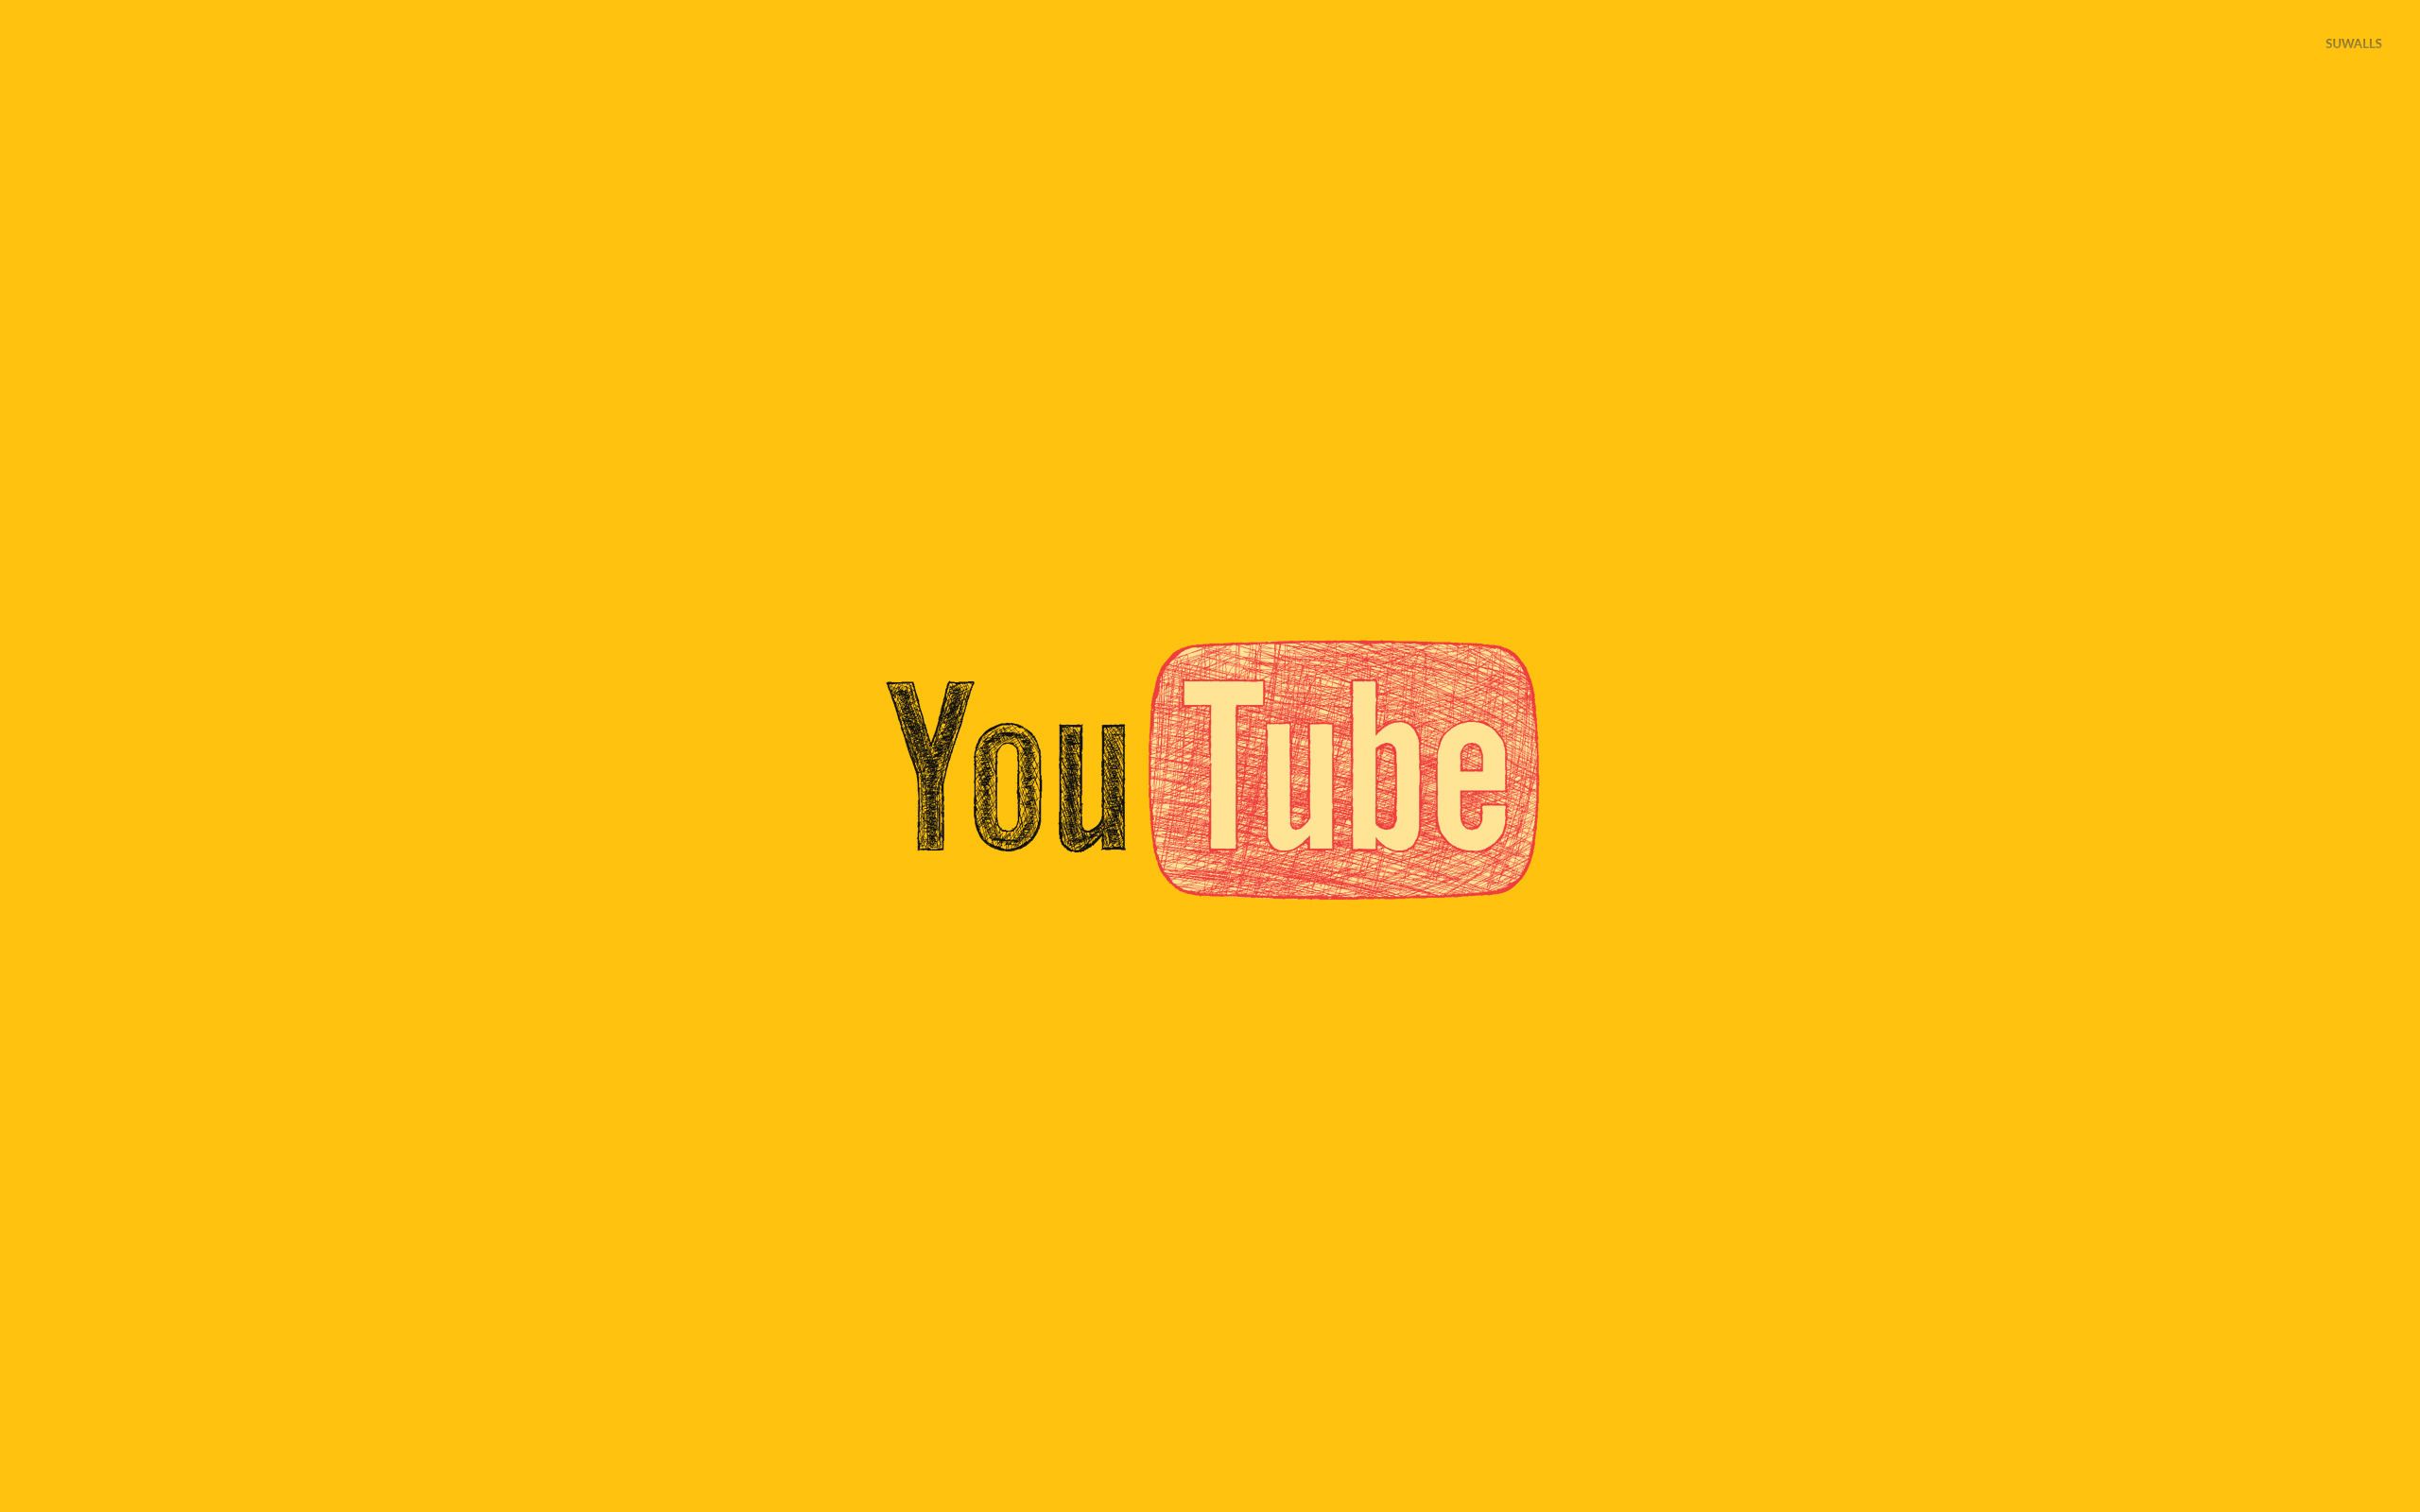 Youtube Background Wallpaper 68959 2560x1600px